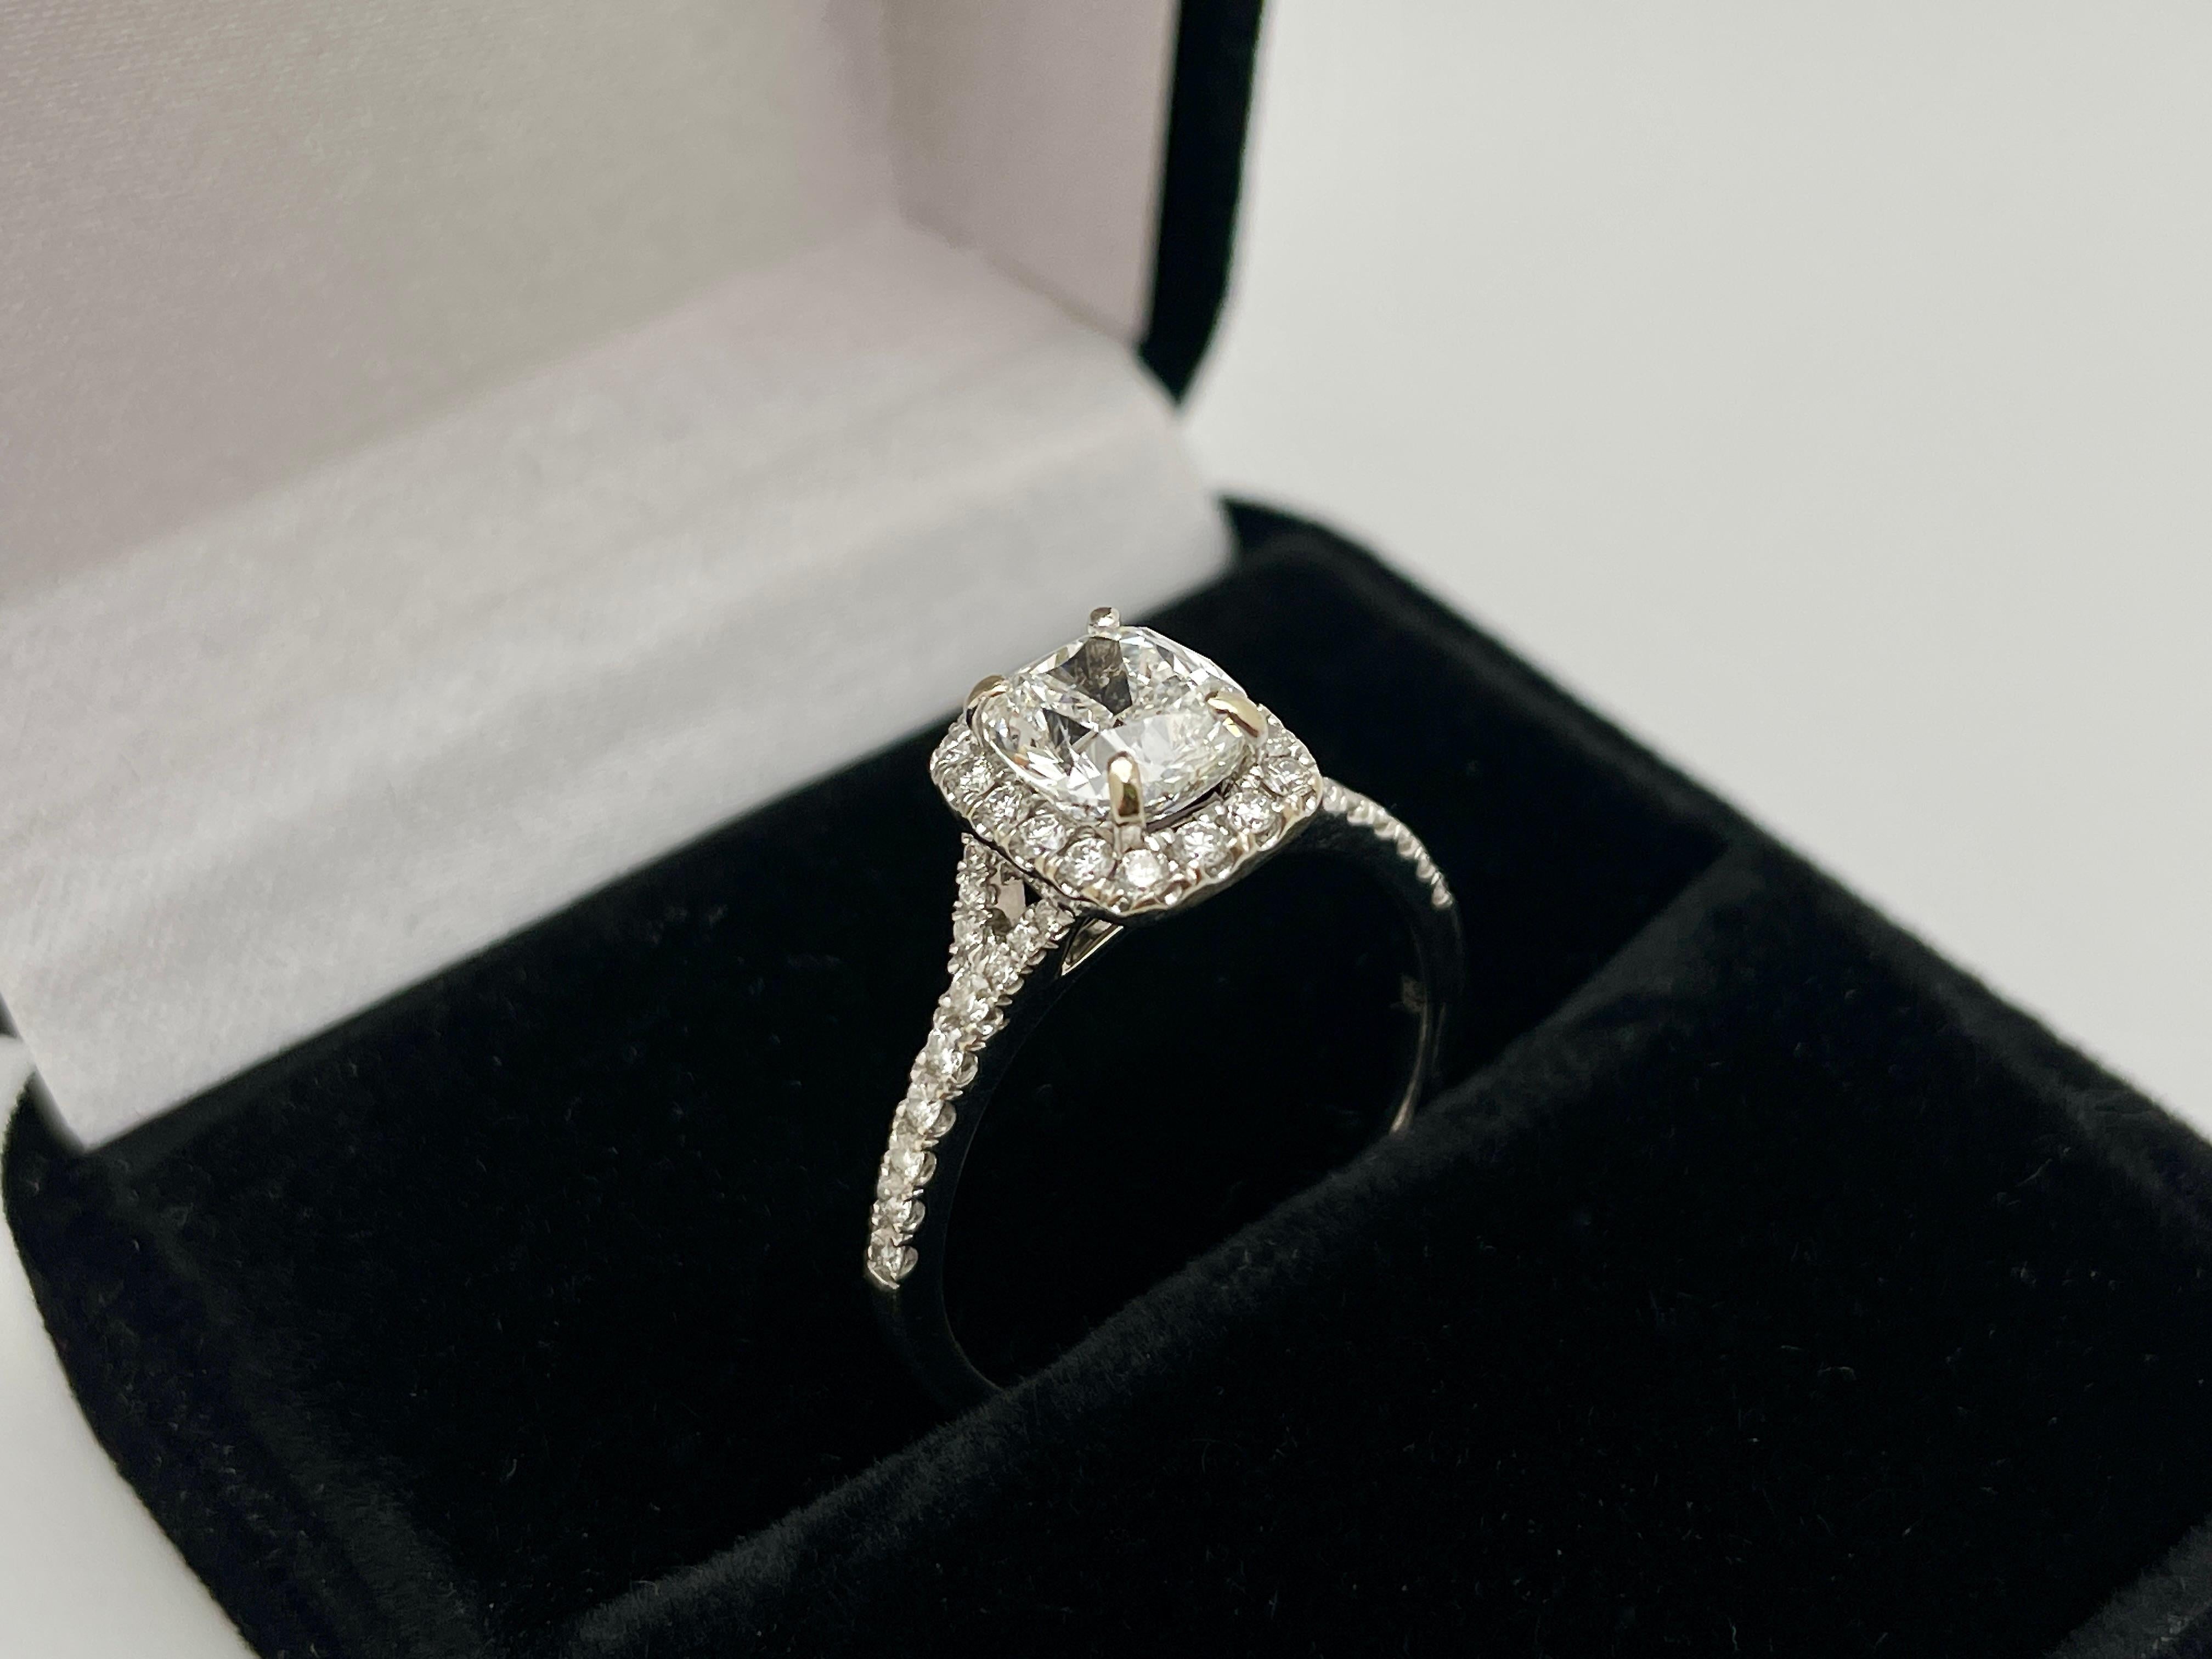 An original GIA certified 18K white gold diamond engagement ring signed Ed.B. Centered with one magnificent 1.52 CT, G color, SI1 clarity, cushion cut  diamond which is accompanied by a GIA certificate. Set with approximately 40 round brilliant cut